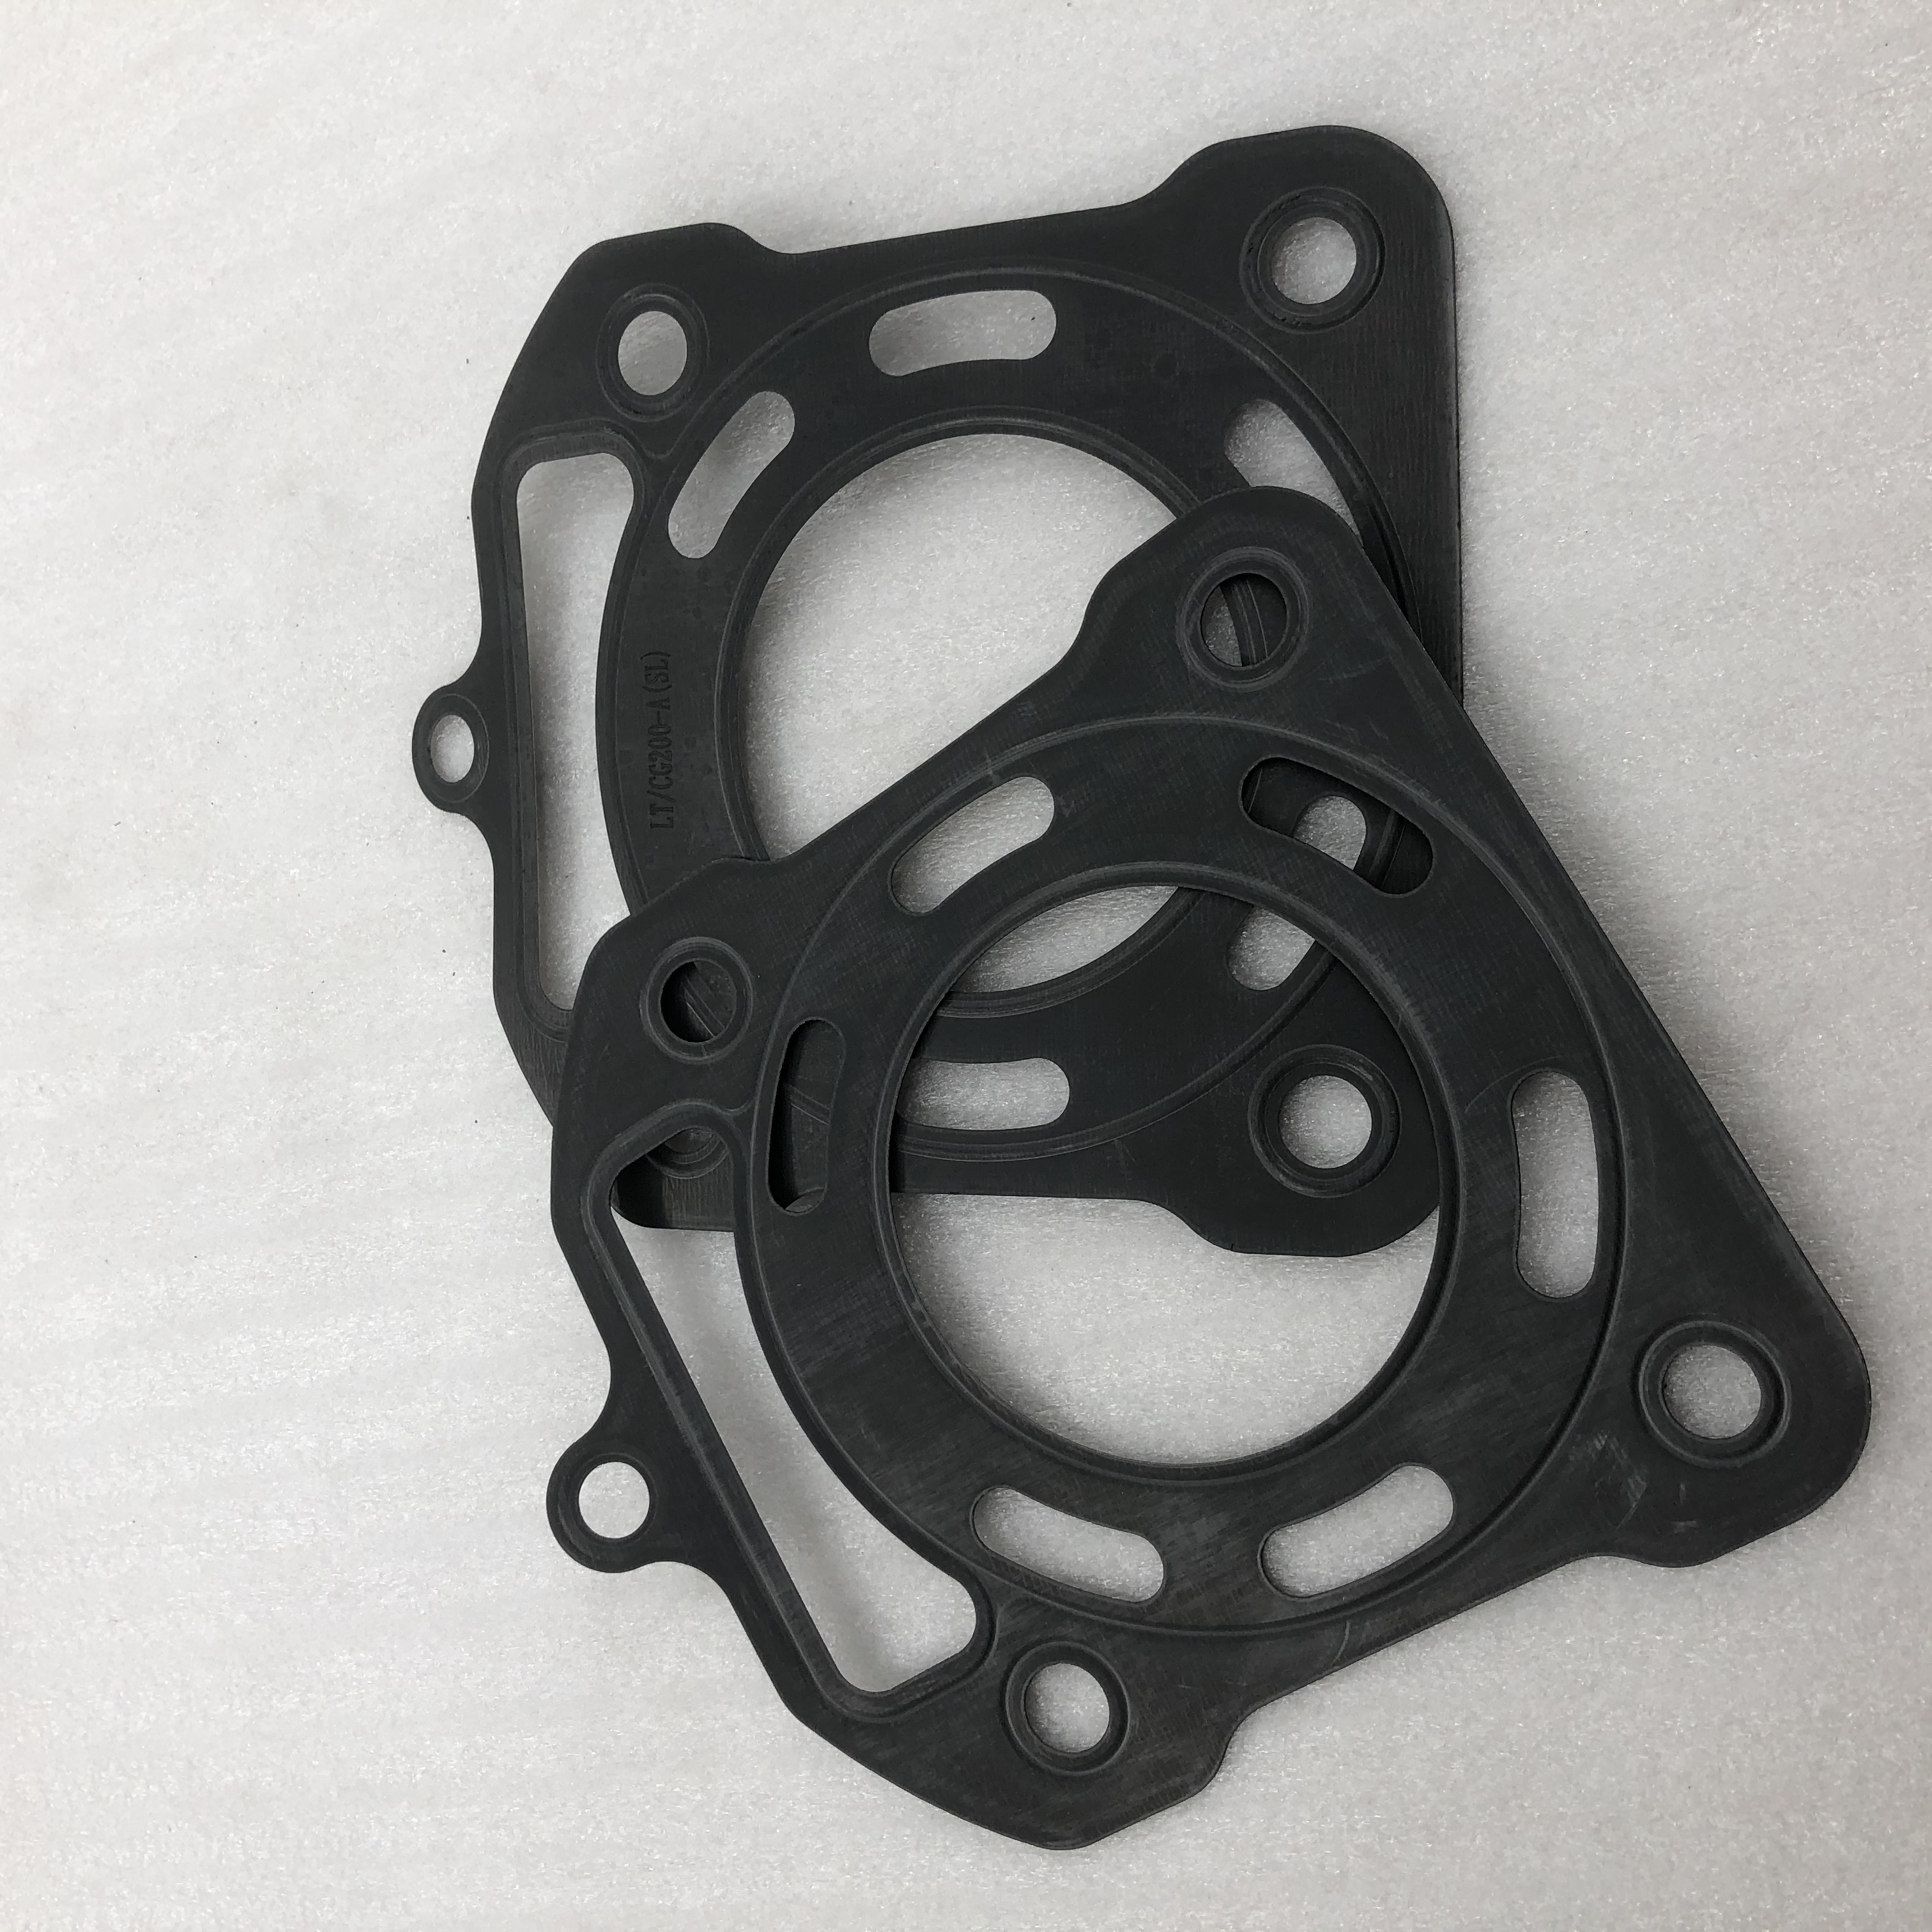 China manufacturer sale High quality Wholesale cg200cc water engine Cylinder gasket motorcycle engine assembly spare parts